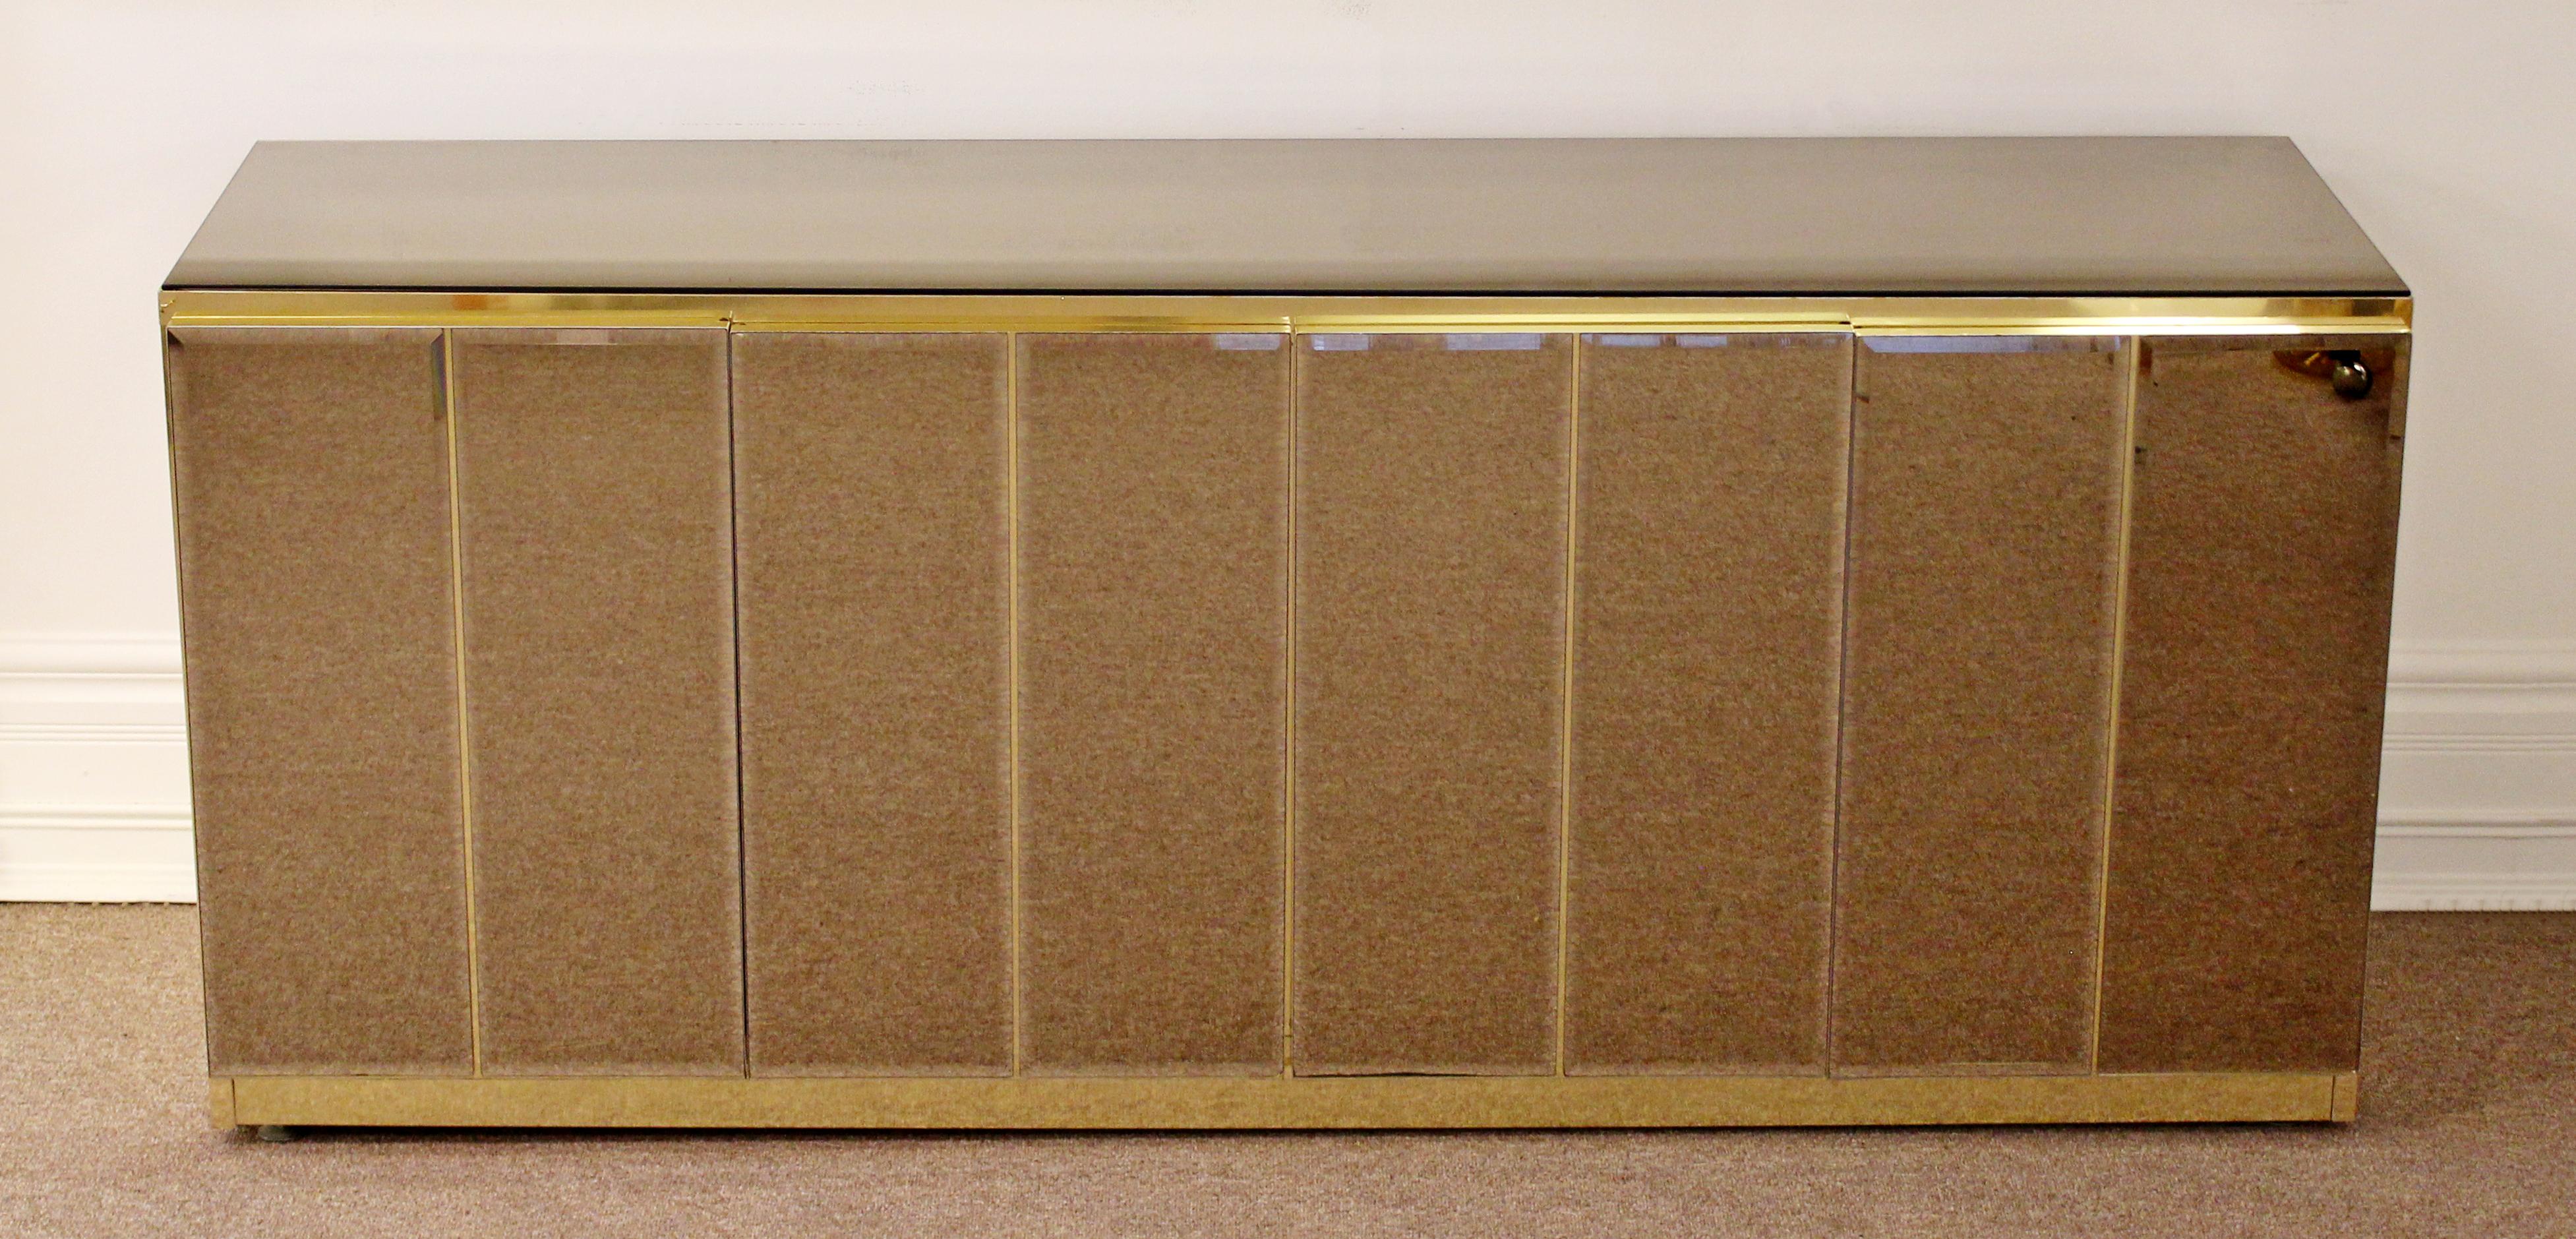 For your consideration is a fabulous credenza, made of brass and smoked mirror by Ello, circa 1970s. In very good vintage condition. The dimensions are 72